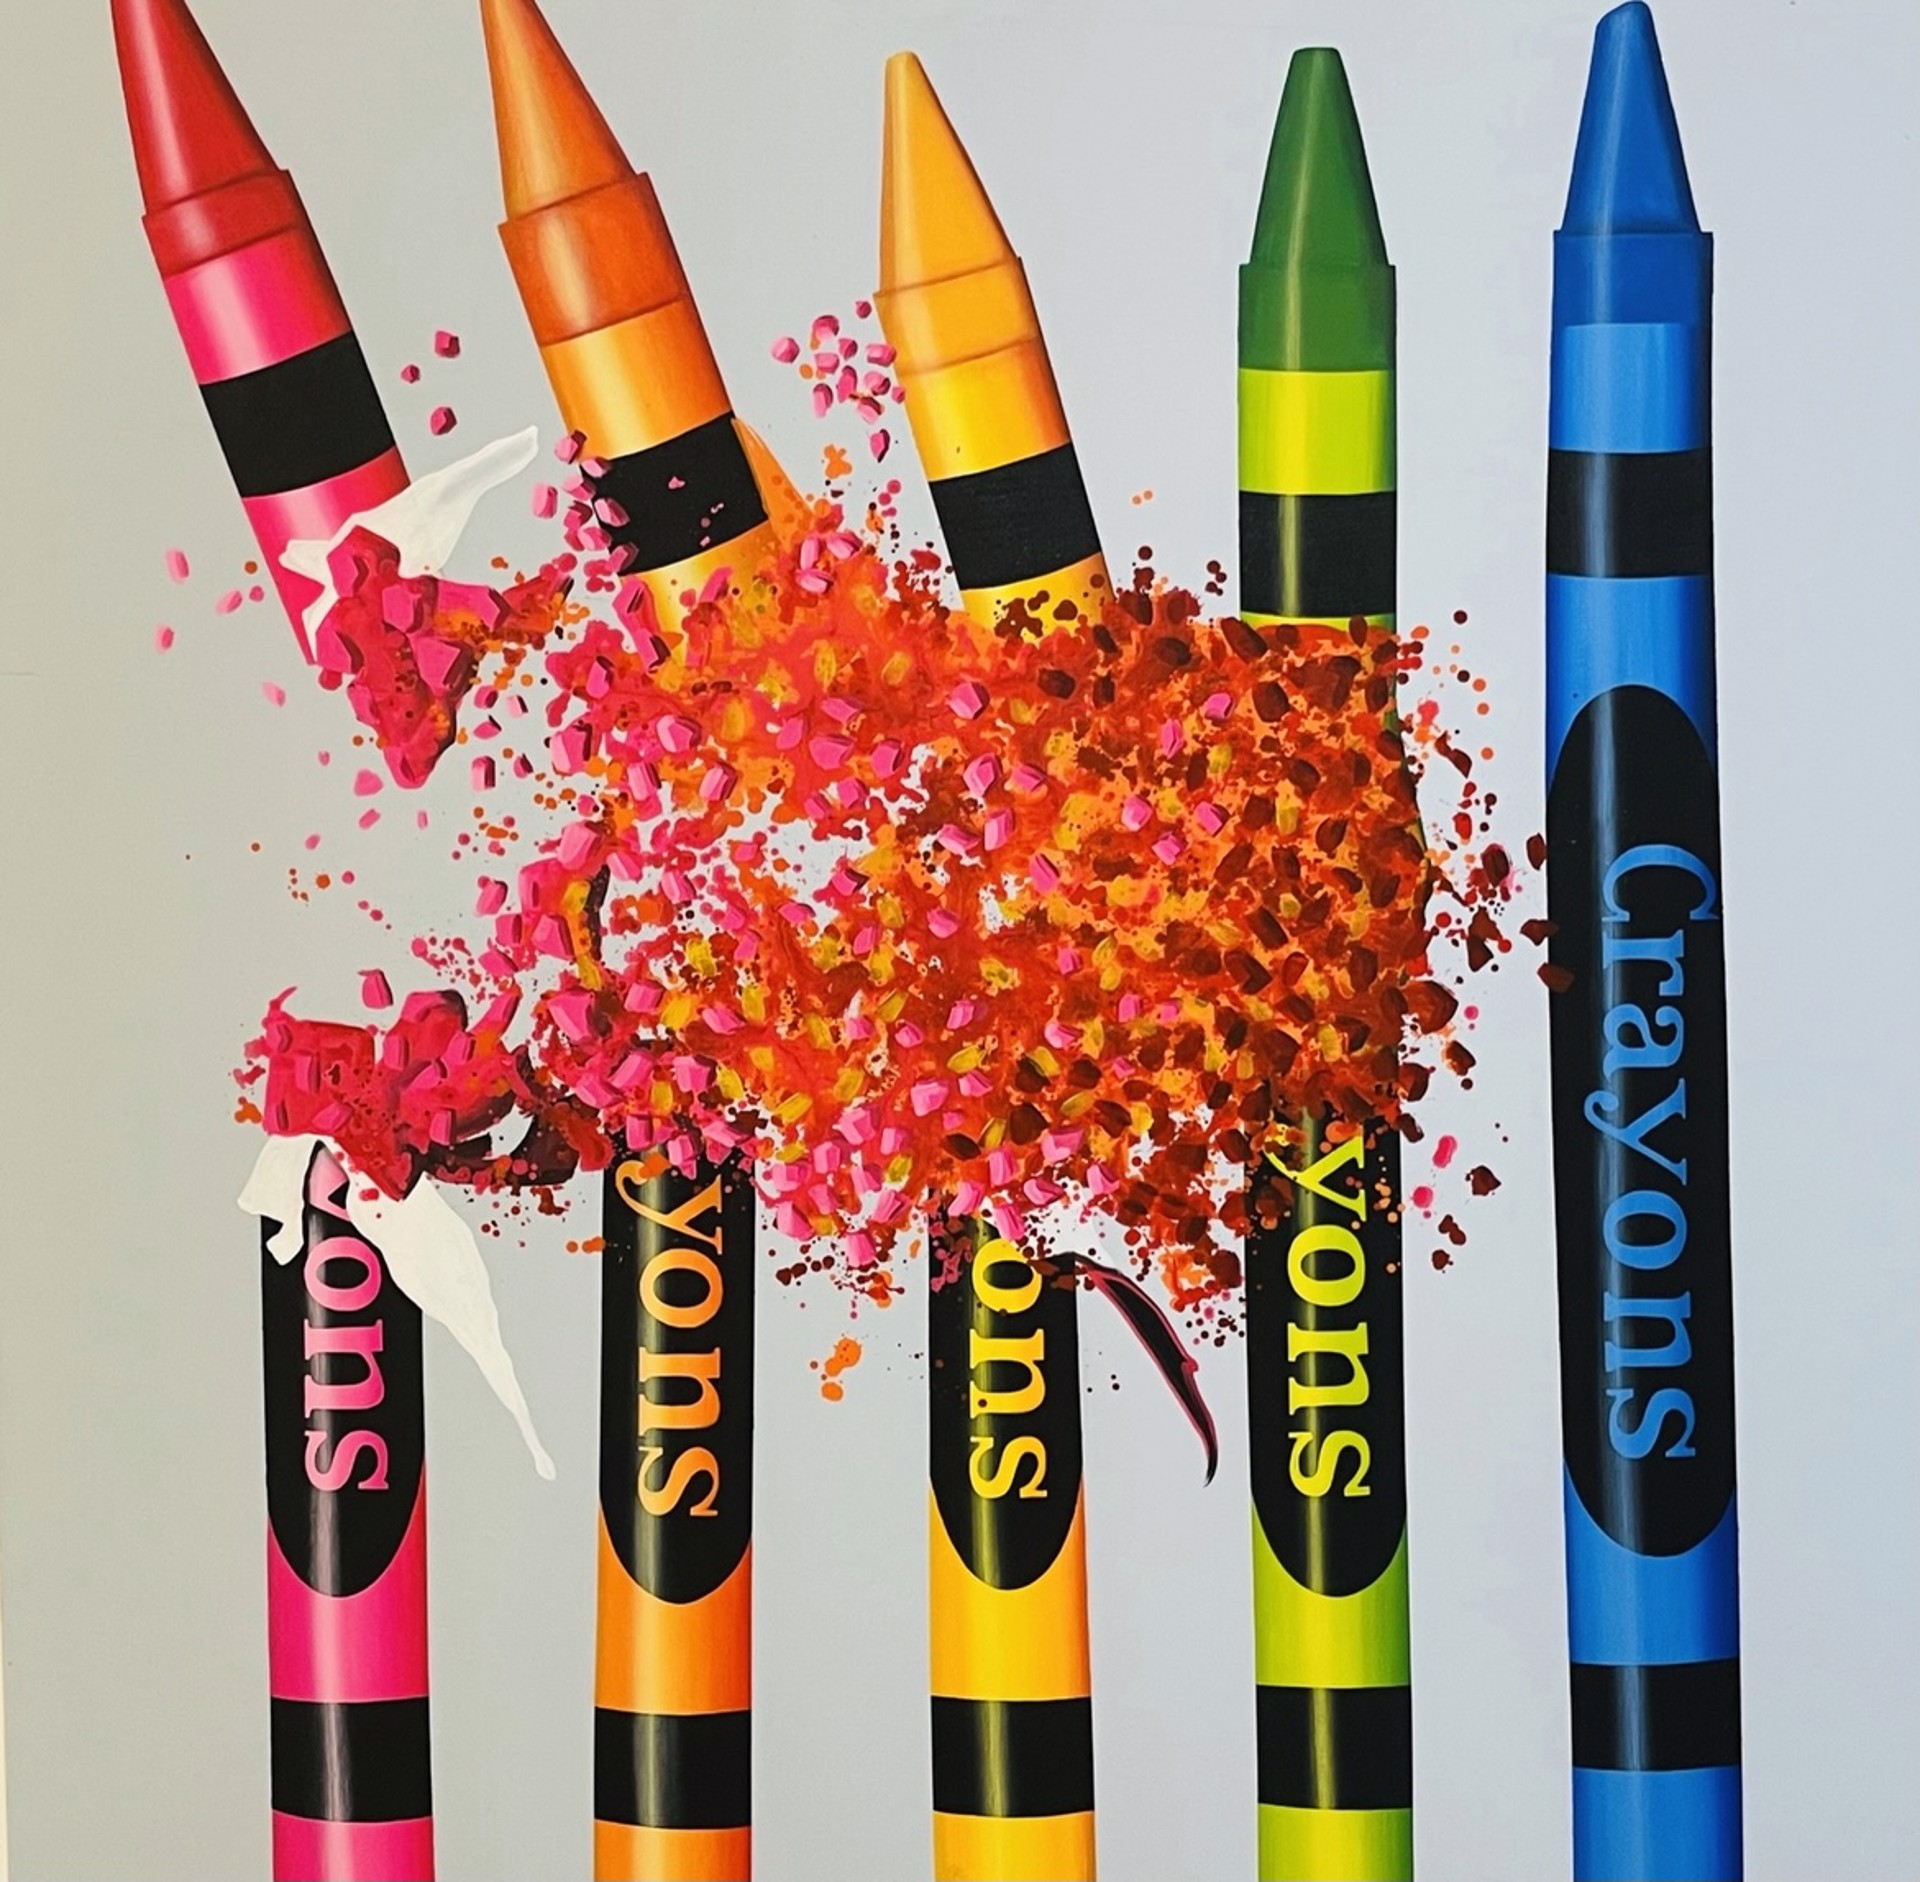 "Colorful Crayons" by BuMa Project